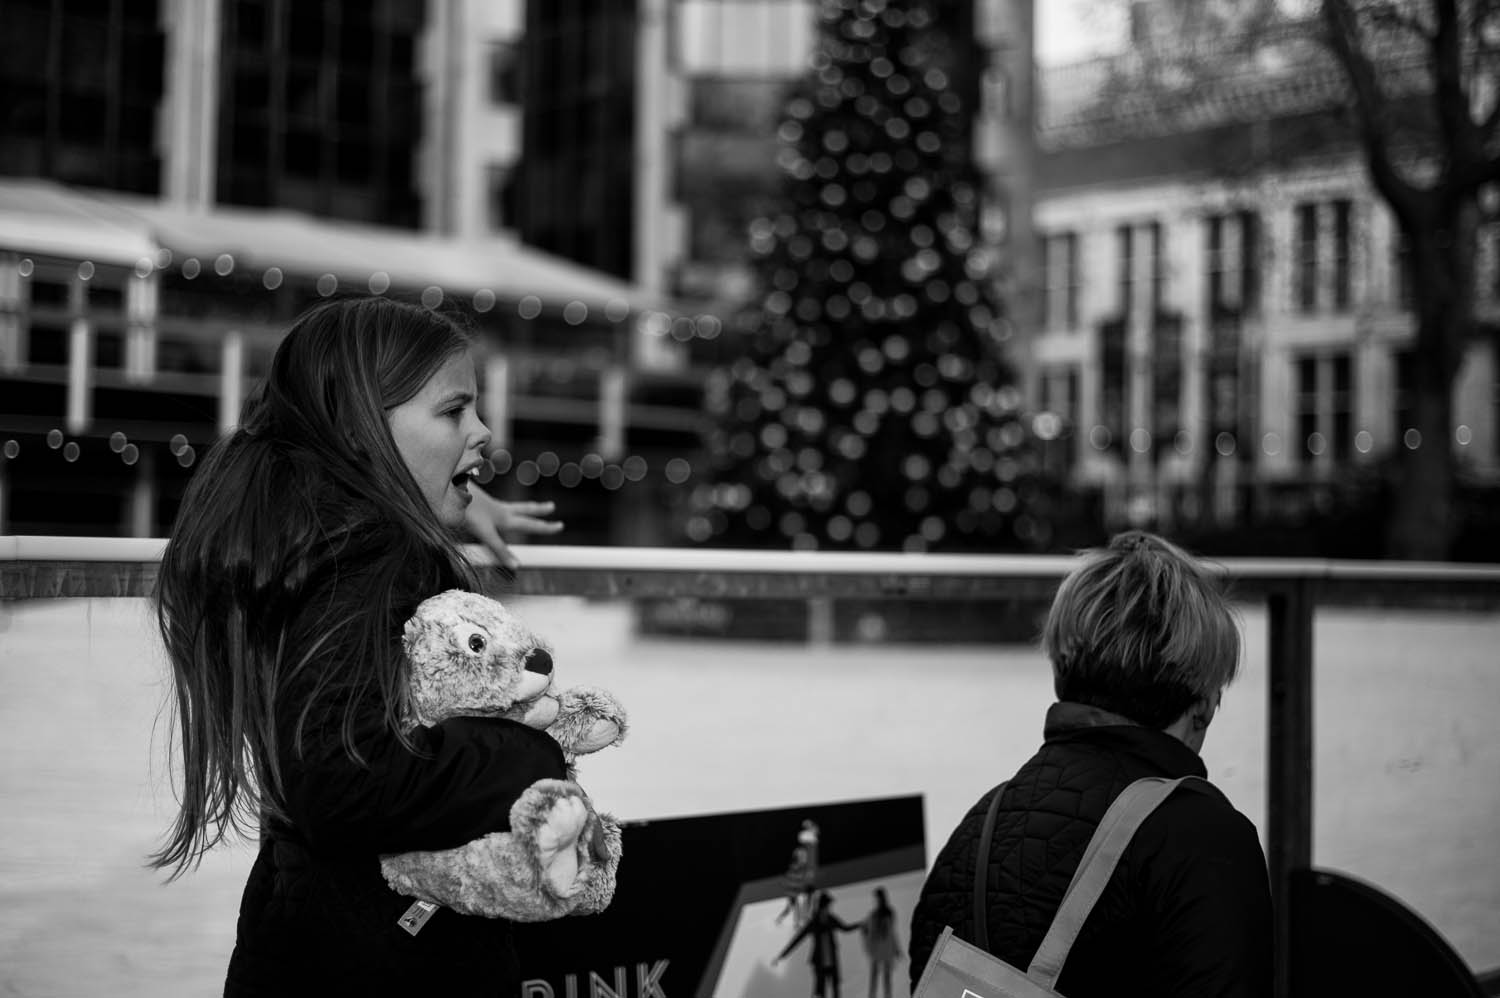 A small girl holding a stuffed animal in front of an outside ice rink and Christmas tree in London